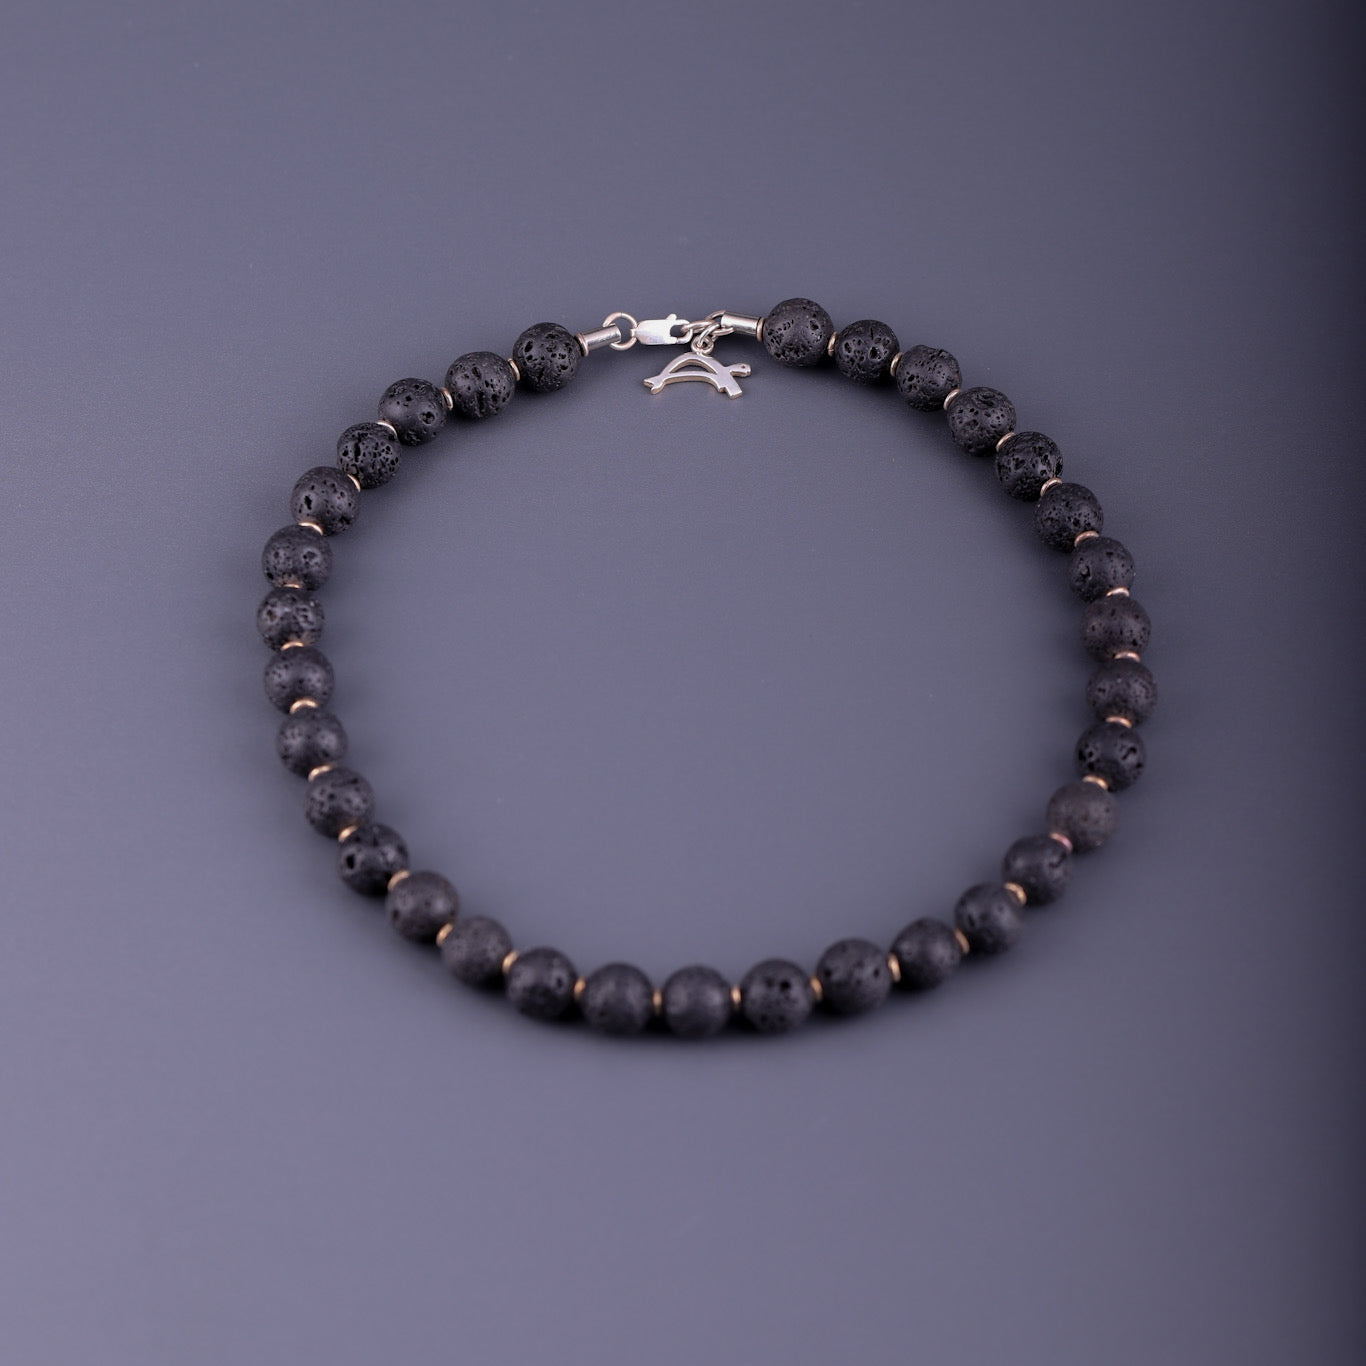 Black Natural Lava round stone and silver necklace